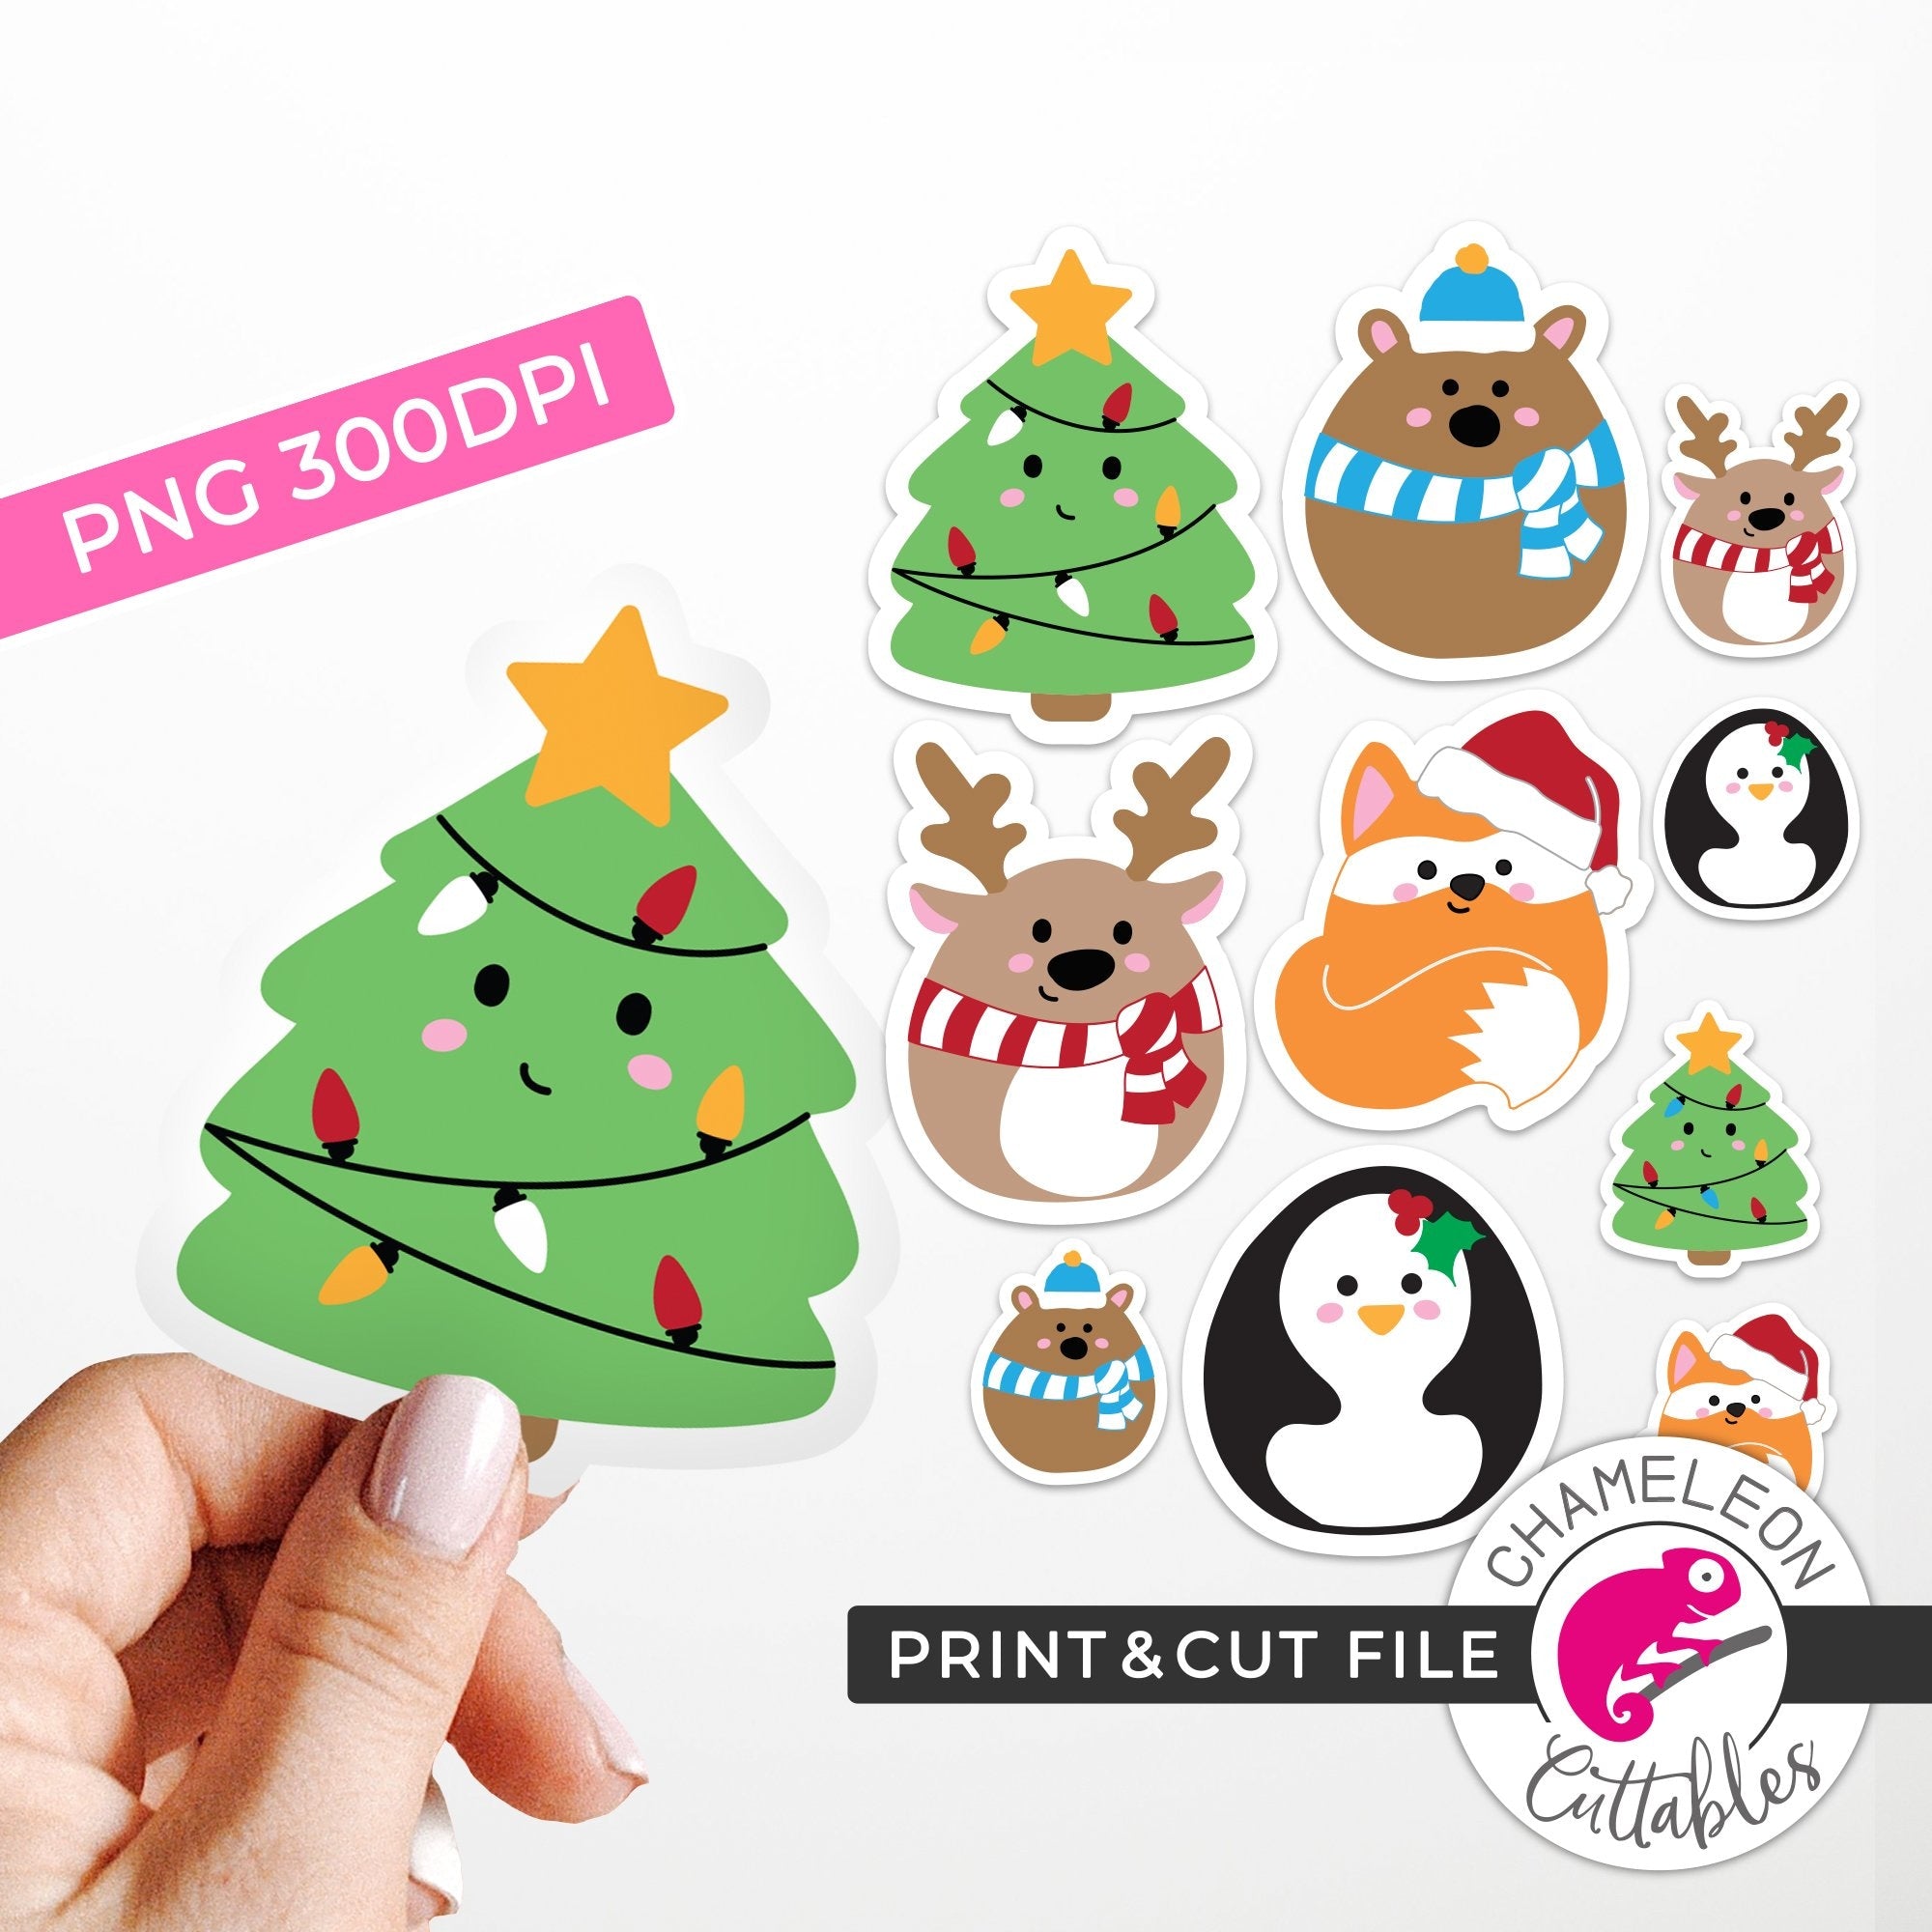 Print and Cut Cute Christmas Animal Stickers PNG Chameleon Cuttables LLC